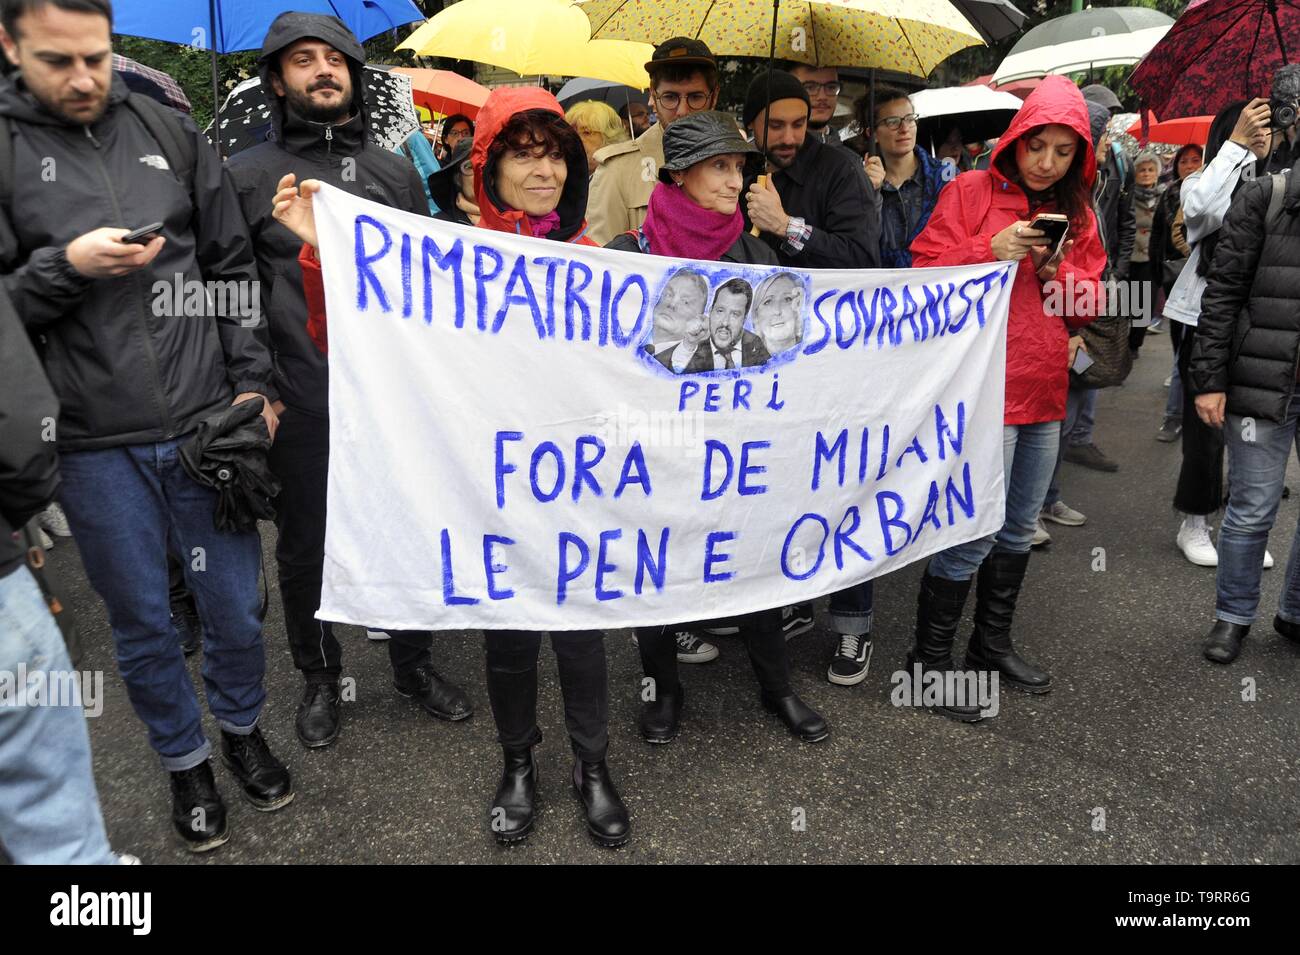 Milan, 18 May 2019, protest demonstration by democratic groups and organizations against an electoral gathering of souverainist and fascist European parties with the presence of Matteo Salvini, Marine Lepen and other extreme-right  political leaders Stock Photo